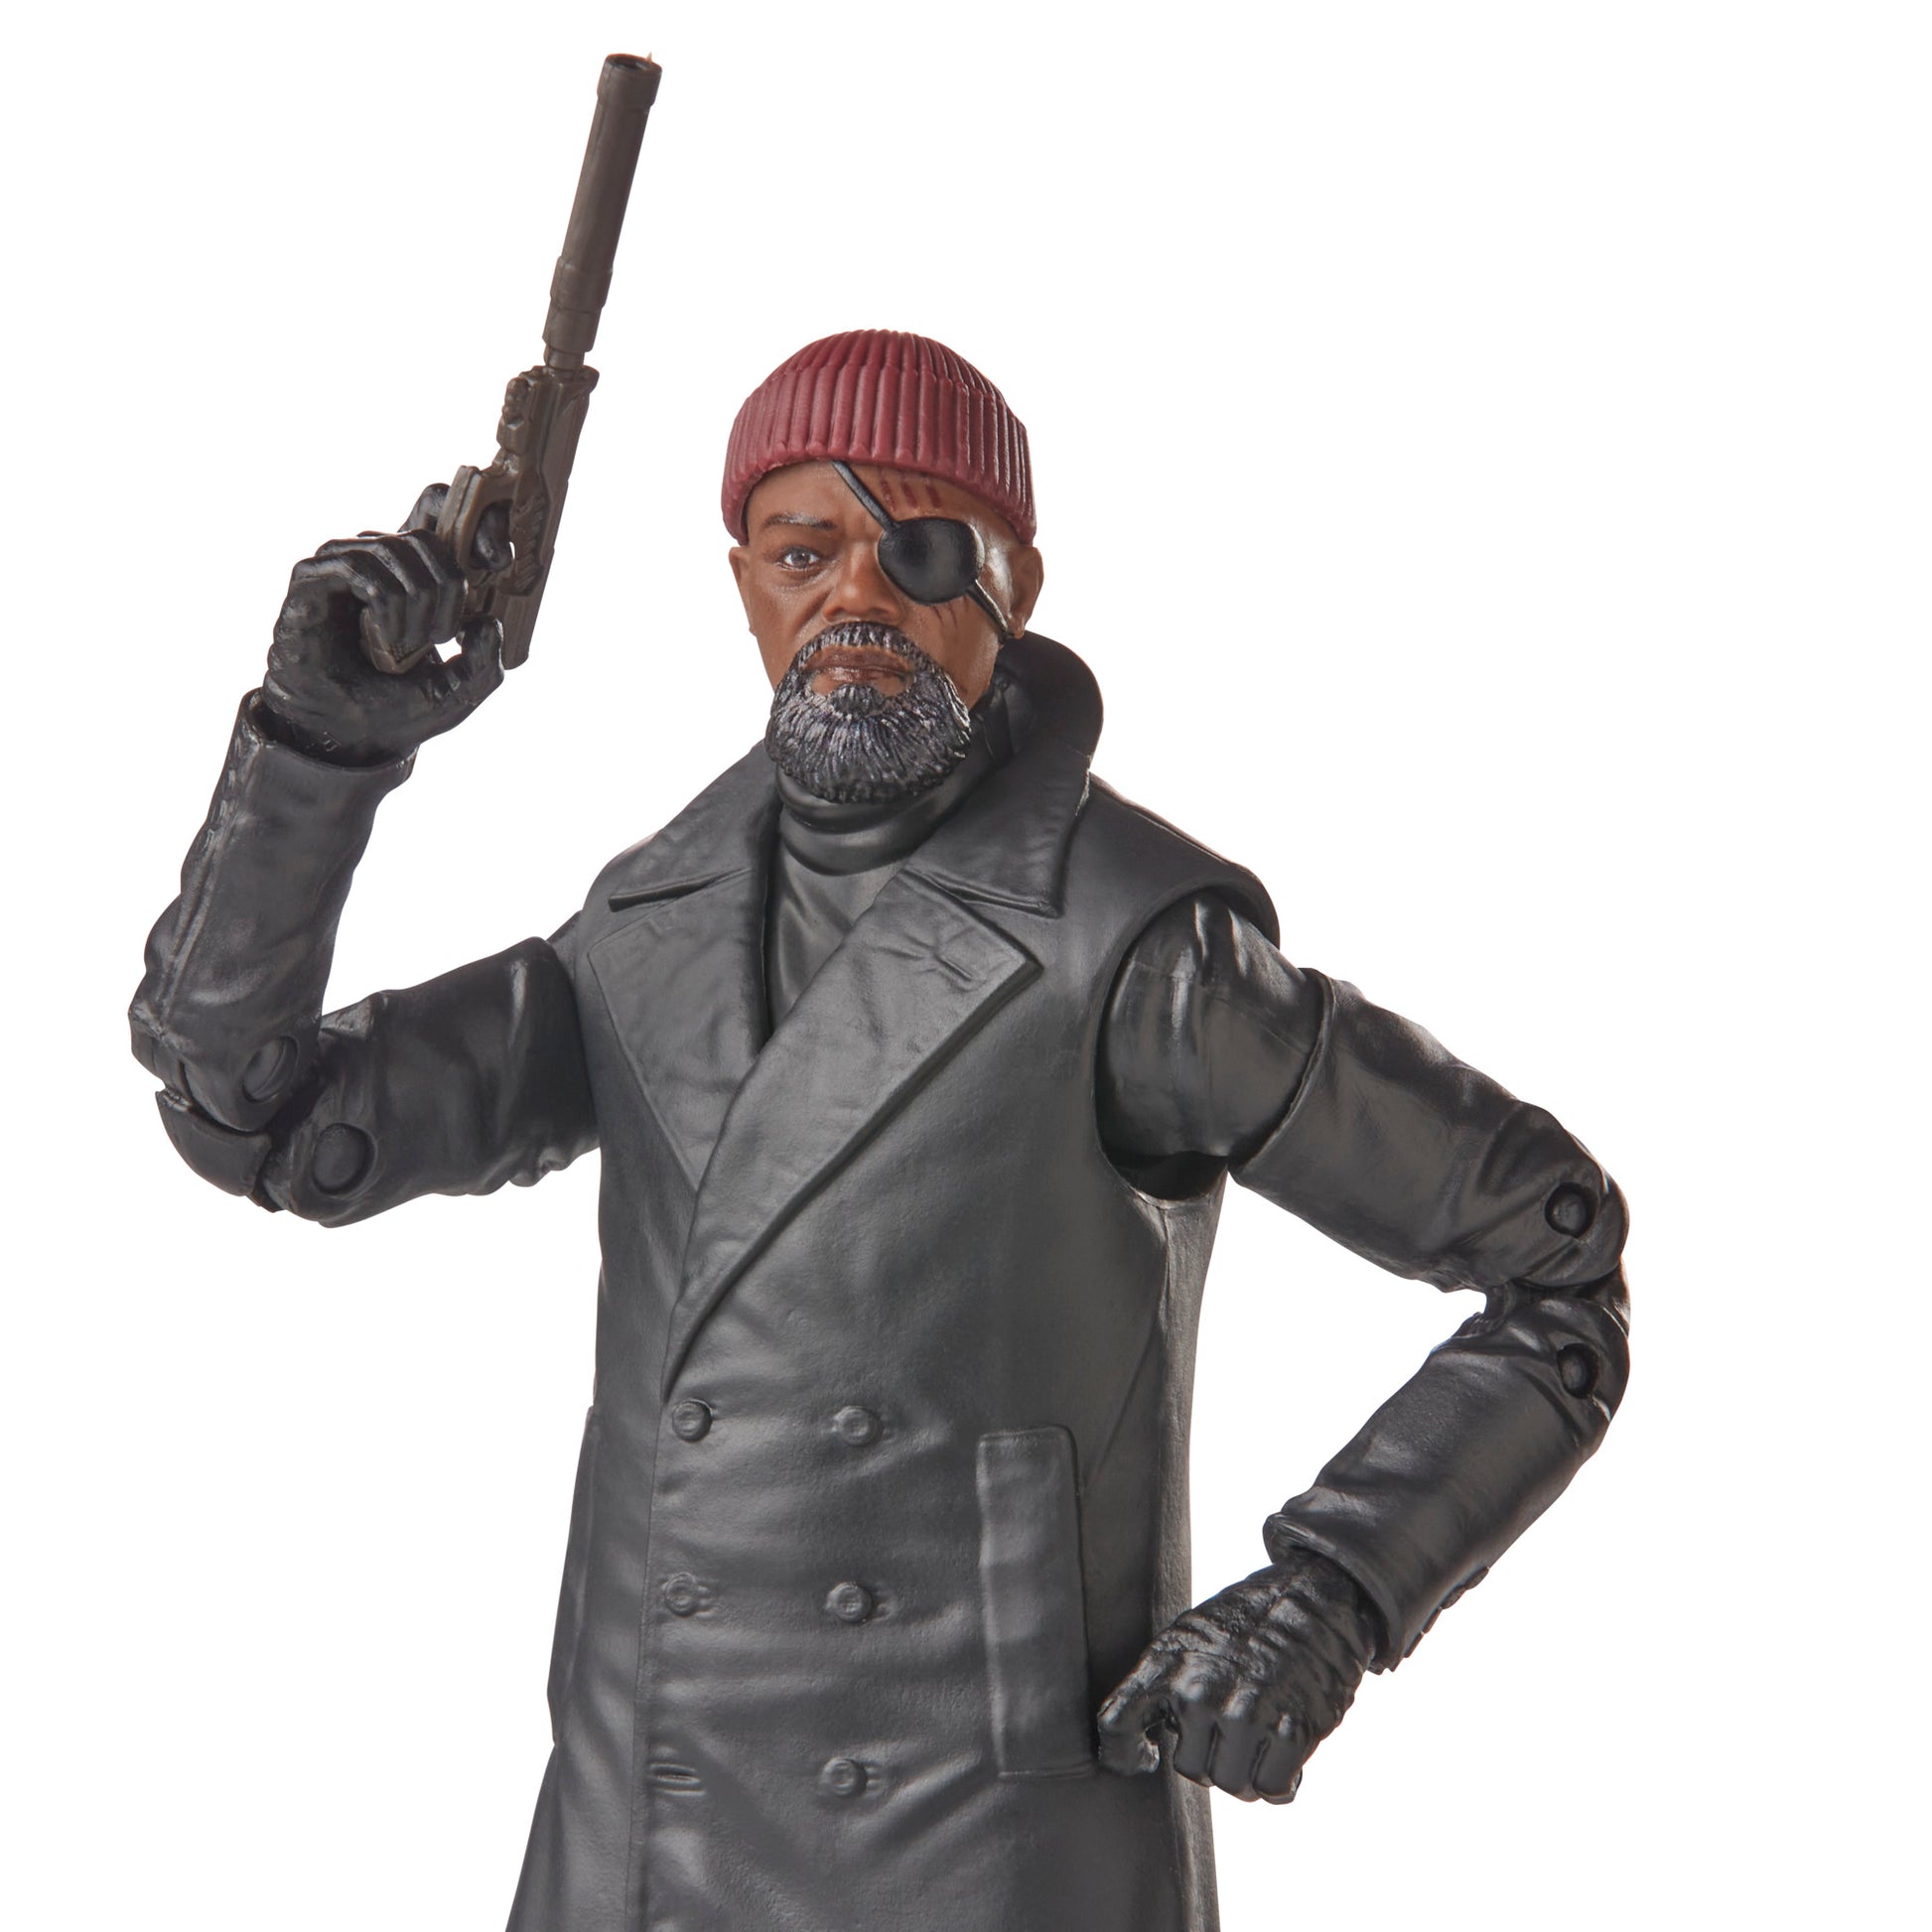 Marvel Legends Series Nick Fury Action Figure 6-Inch Toy close up look - Heretoserveyou